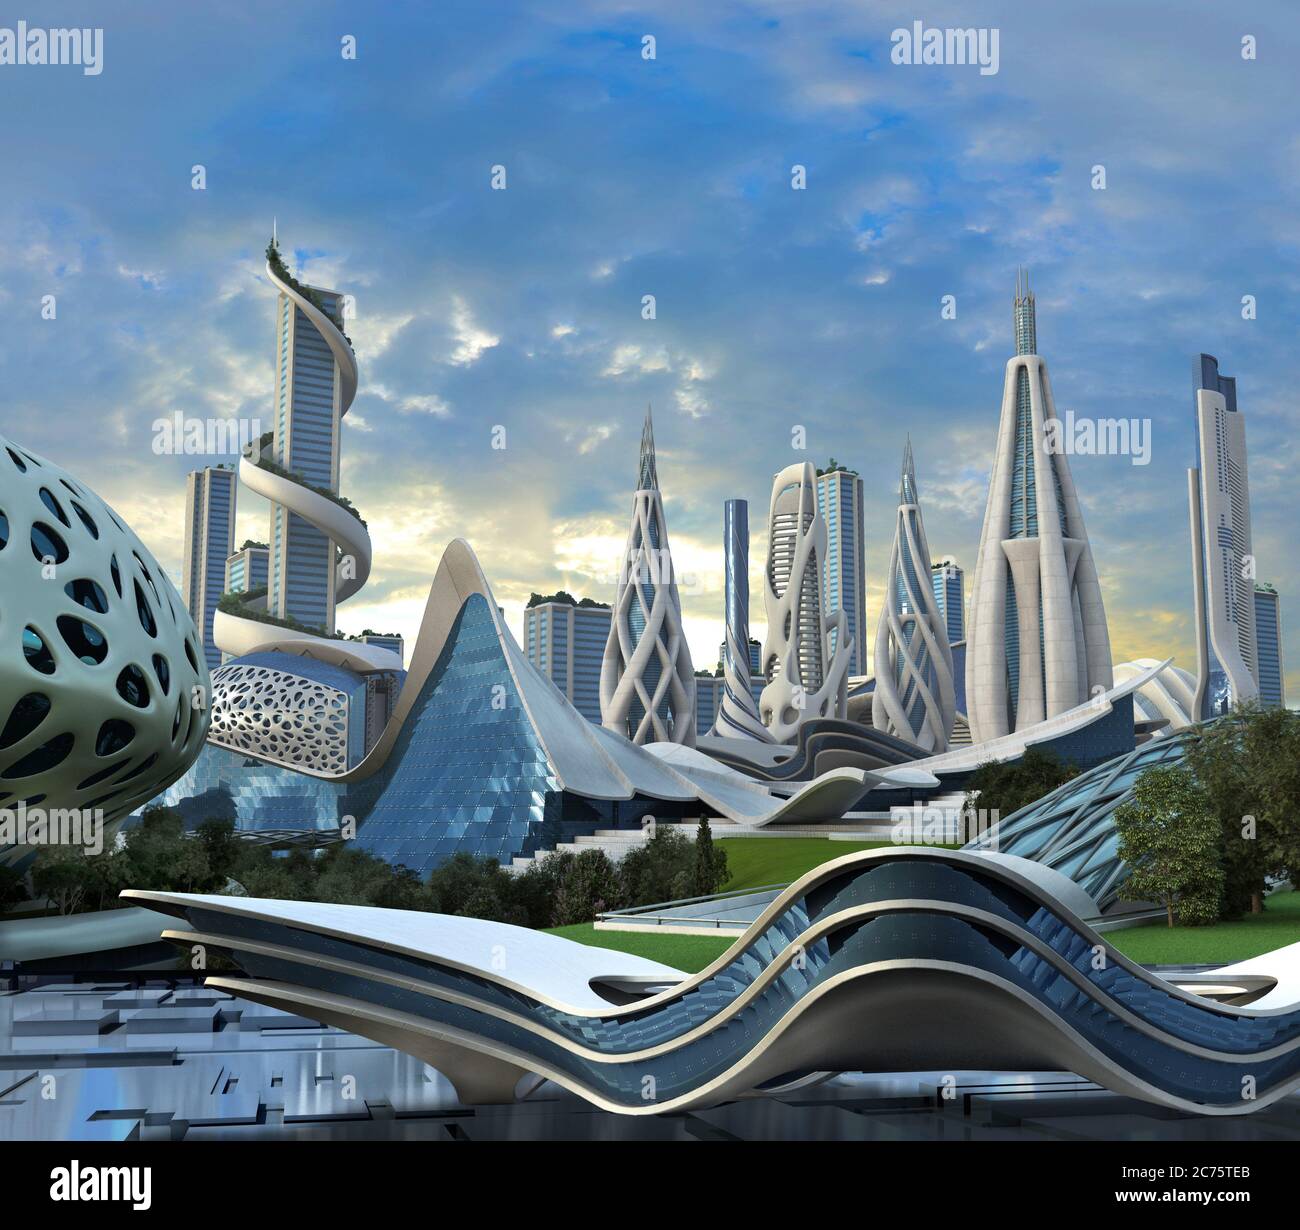 3D illustration of a futuristic city with high-rise buildings in an organic architectural design for science fiction backgrounds. Stock Photo